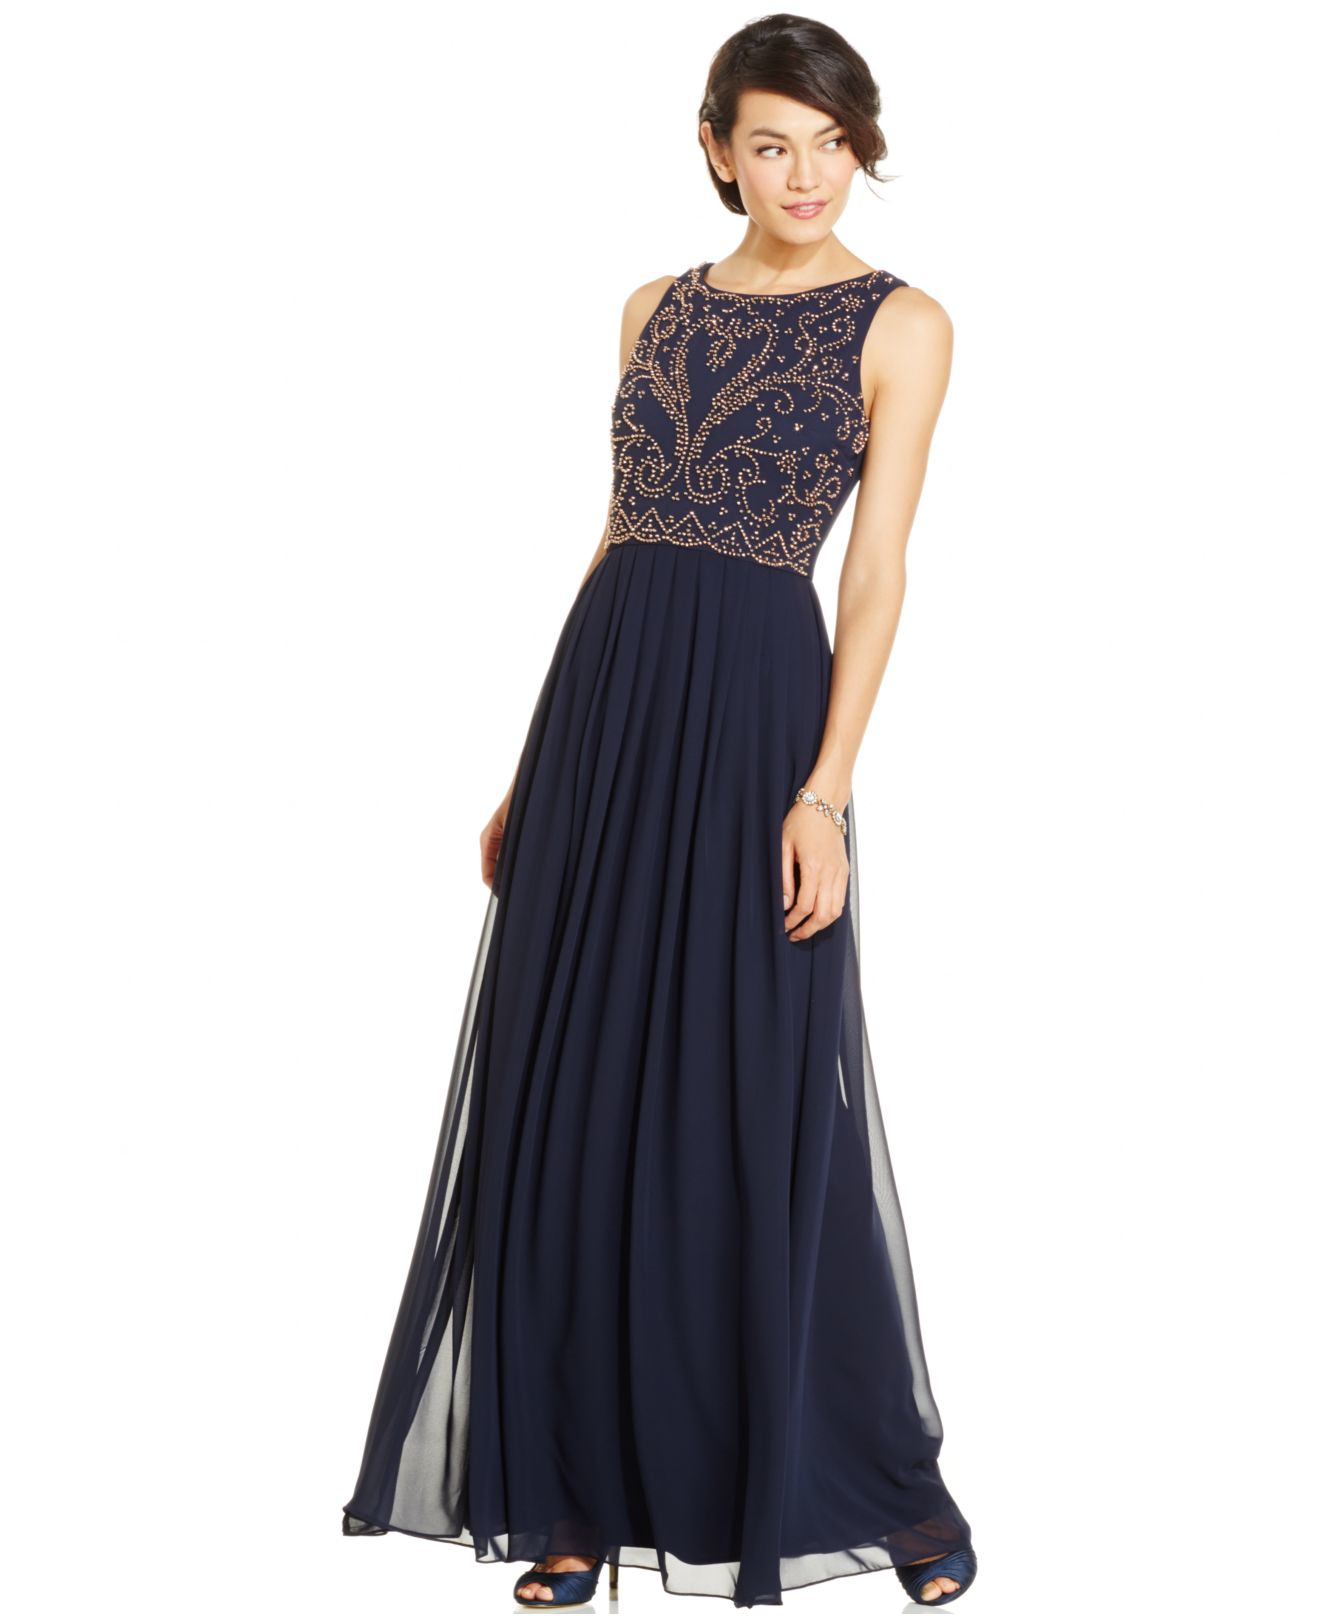 Lyst - Xscape Embellished Chiffon Evening Gown in Blue